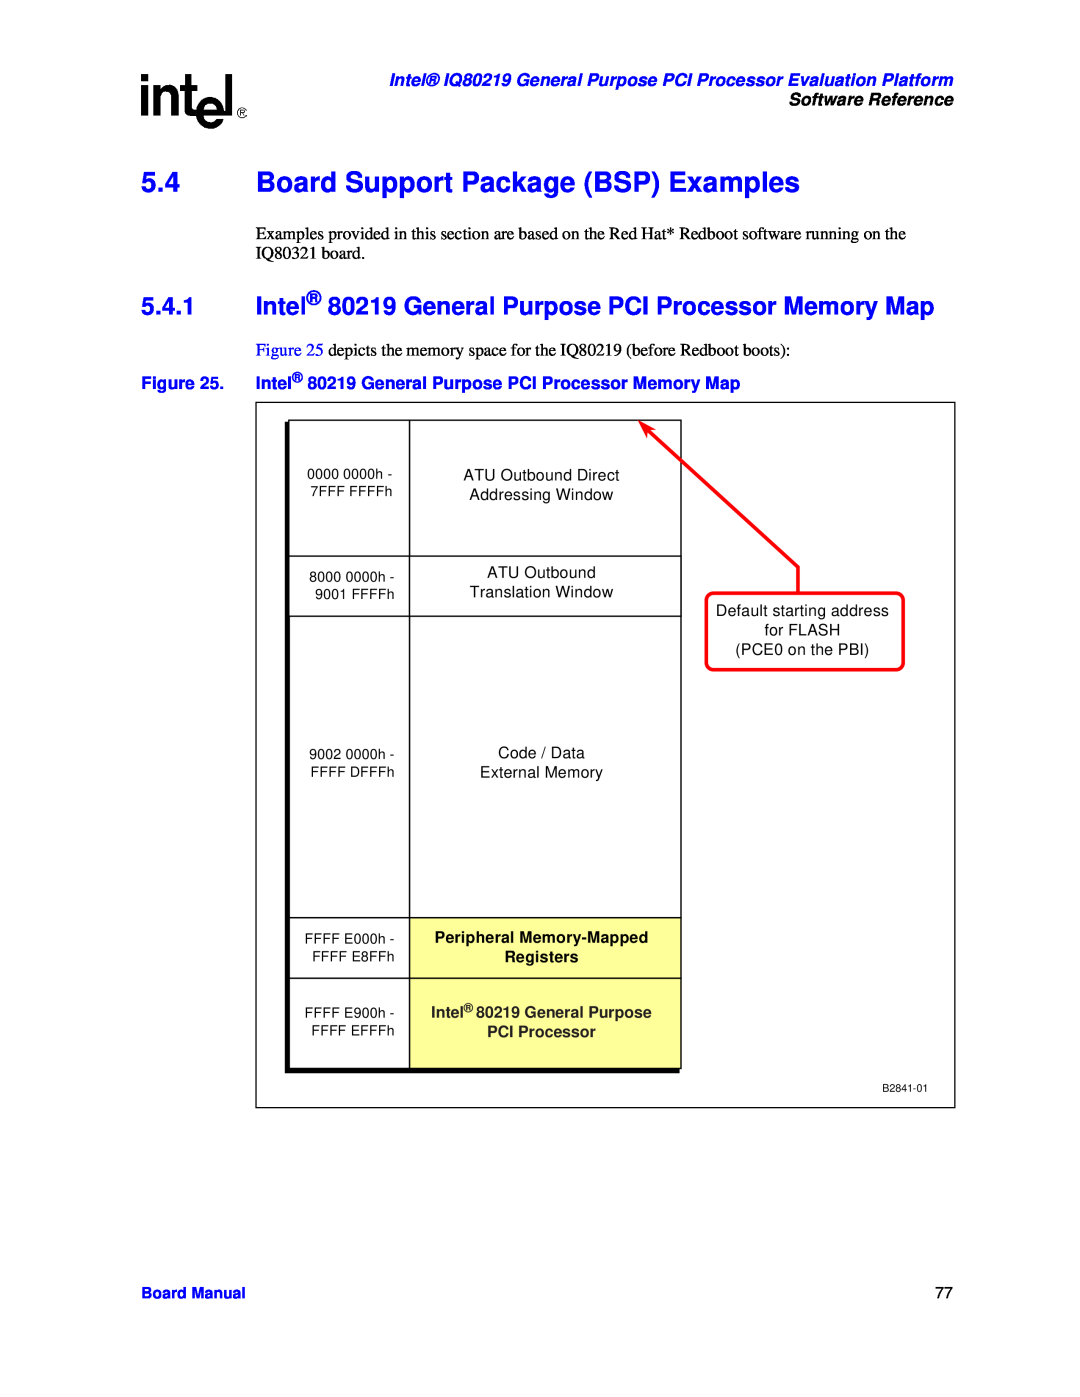 Intel IQ80219 Board Support Package BSP Examples, Intel 80219 General Purpose PCI Processor Memory Map, Software Reference 